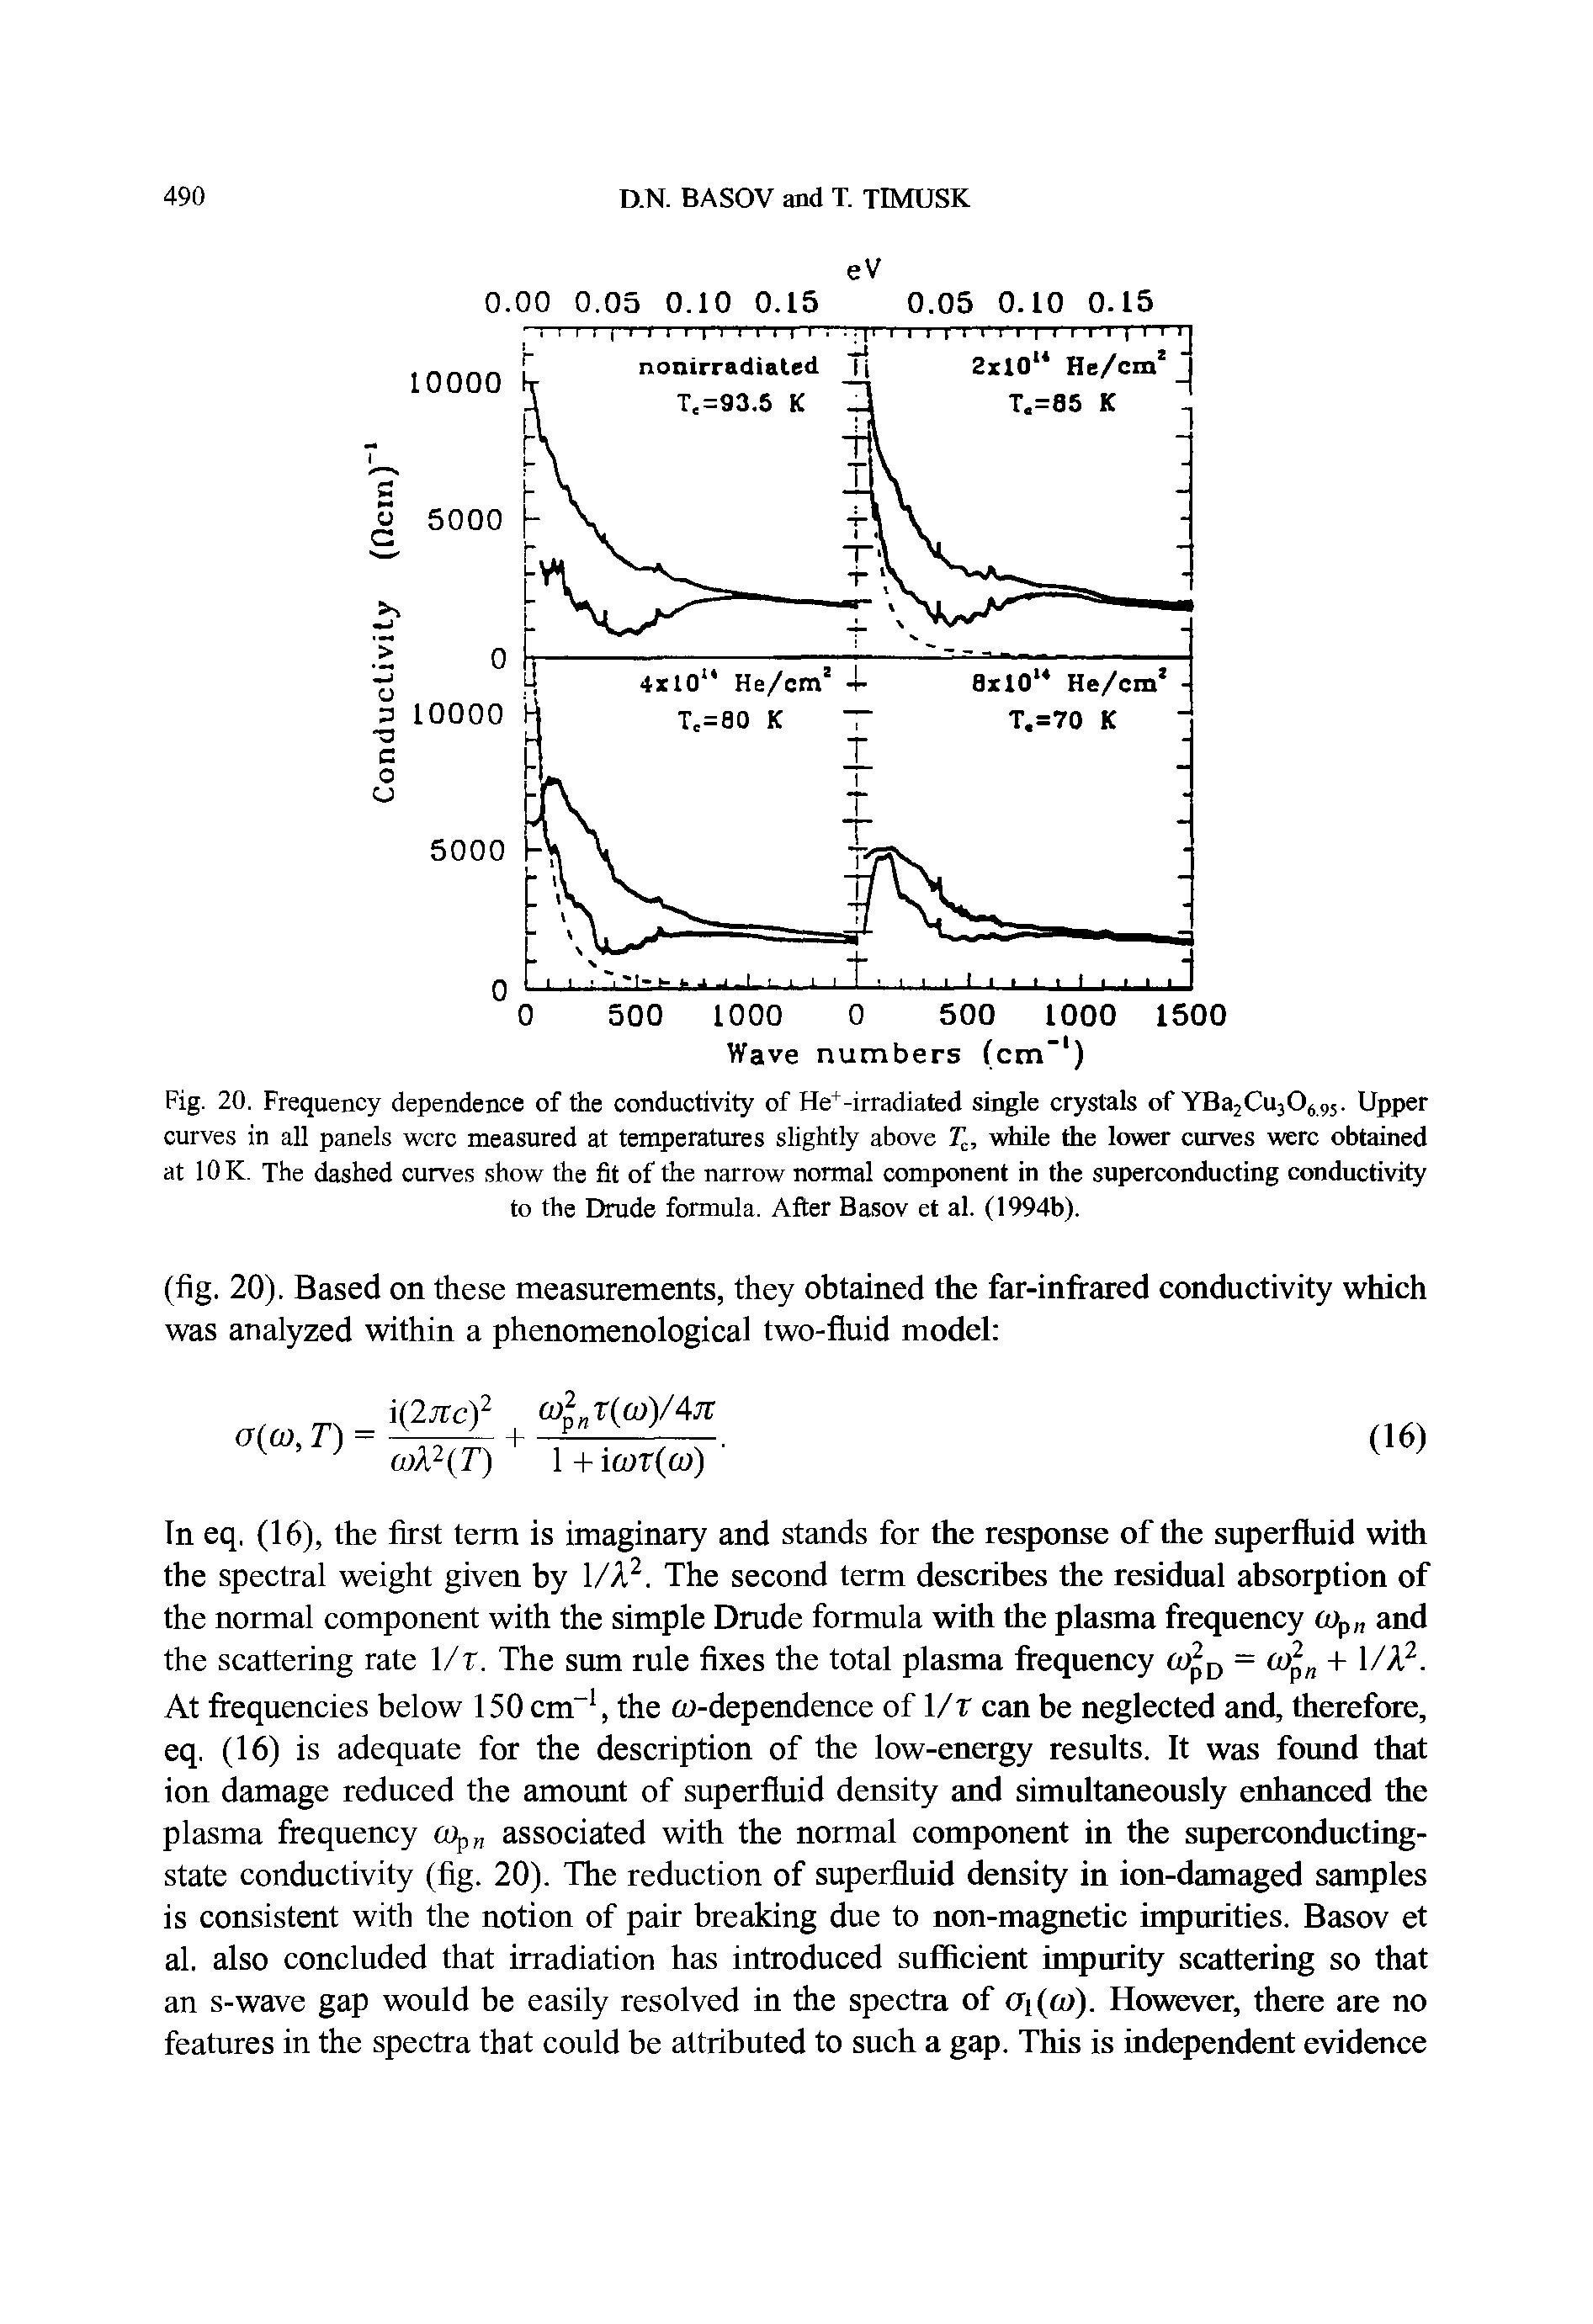 Fig. 20. Frequency dependence of the conductivity of He+-irradiated single crystals of YBa2Cu30 95. Upper curves in all panels were measured at temperatures slightly above T, while the lower curves were obtained at 10 K. The dashed curves show the fit of the narrow normal component in the superconducting conductivity to the Drude formula. After Basov et al. (1994b).